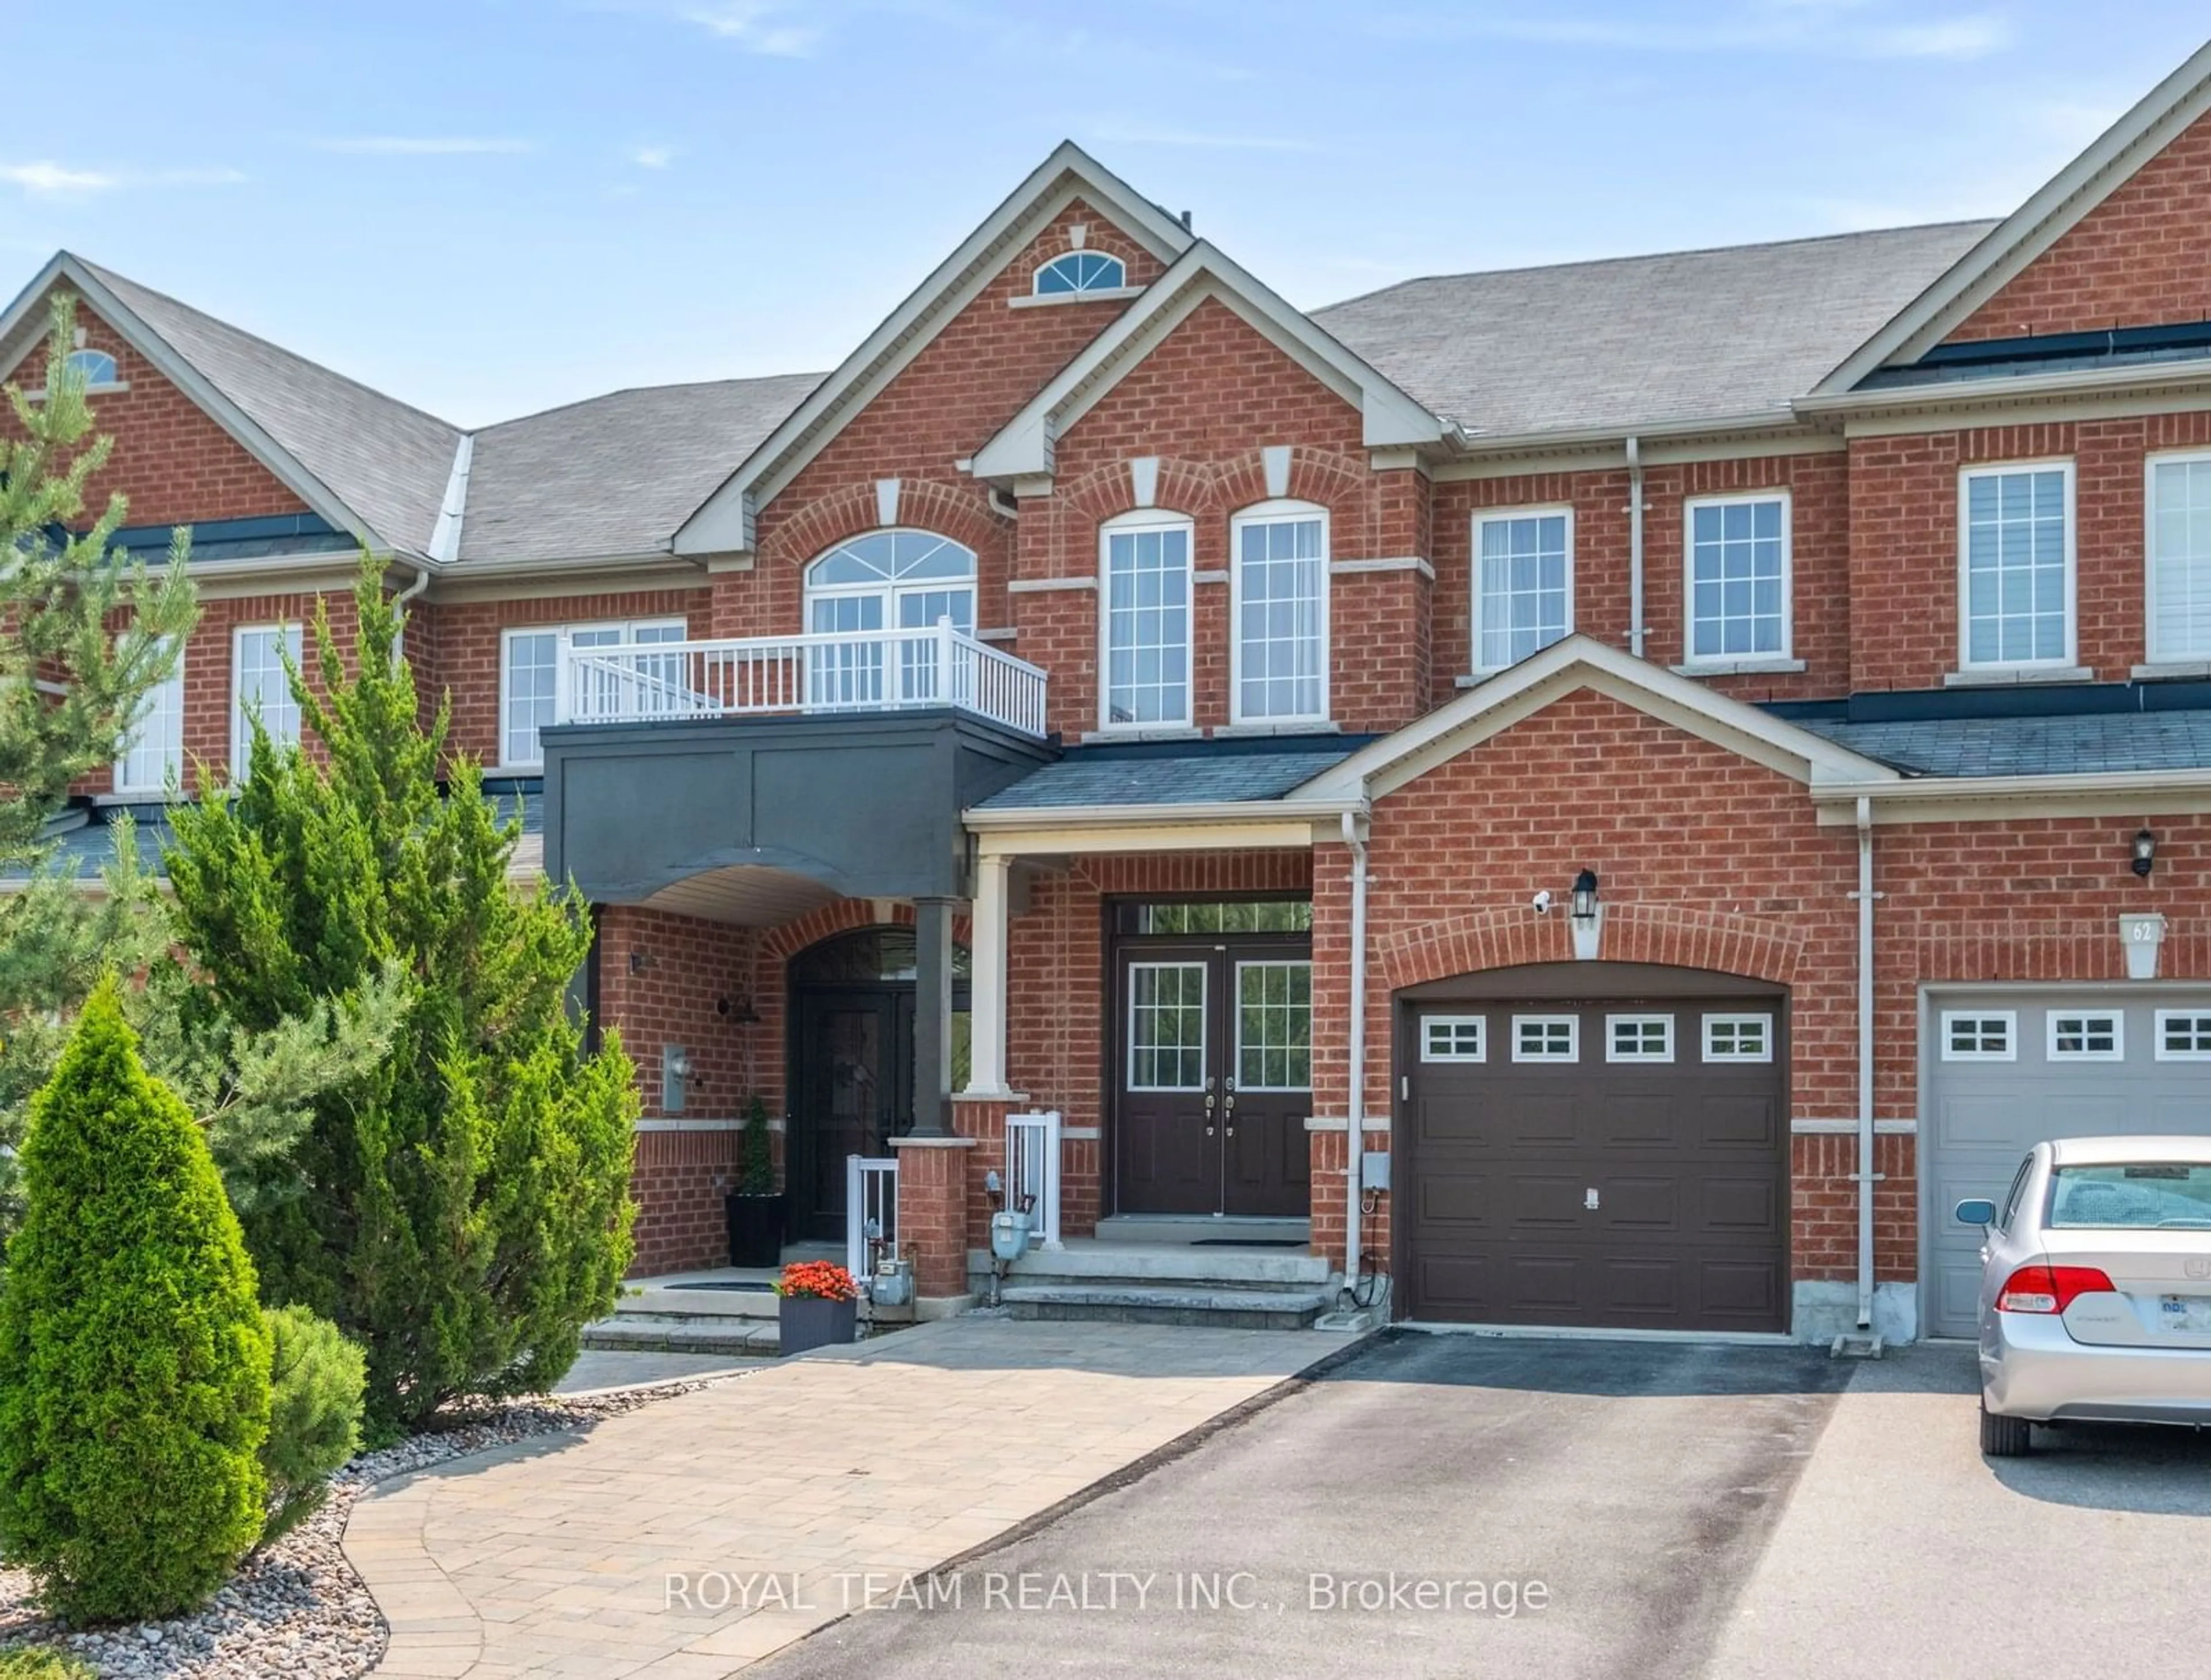 Home with brick exterior material for 60 White Beach Cres, Vaughan Ontario L6A 4K6